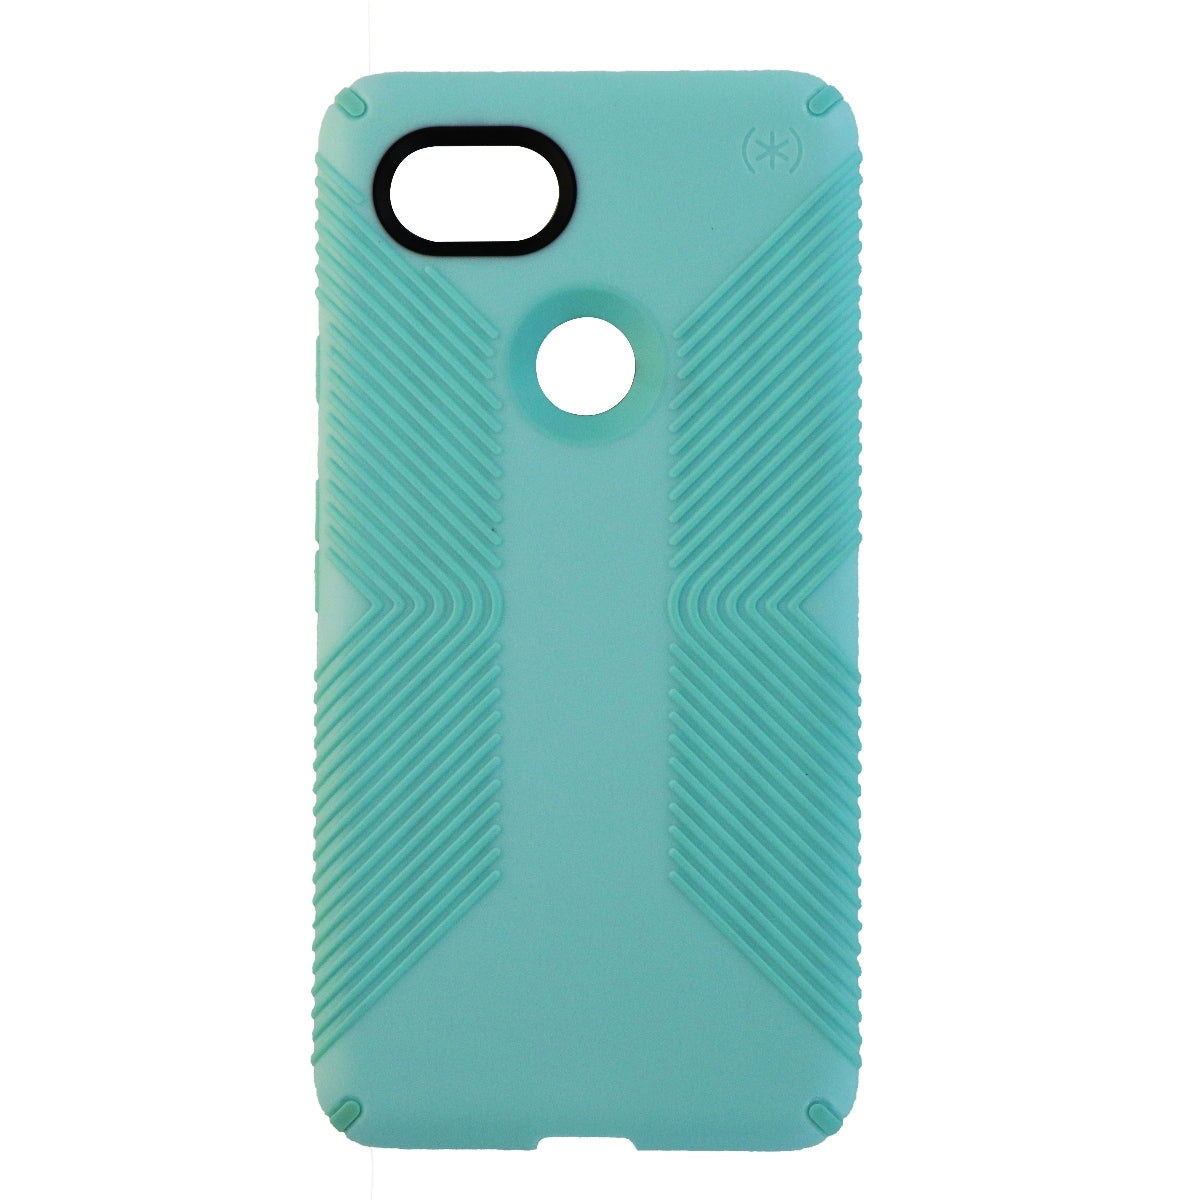 Speck Presidio Grip Series Hybrid Case for Google Pixel 2 XL Smartphones - Teal Cell Phone - Cases, Covers & Skins Speck    - Simple Cell Bulk Wholesale Pricing - USA Seller